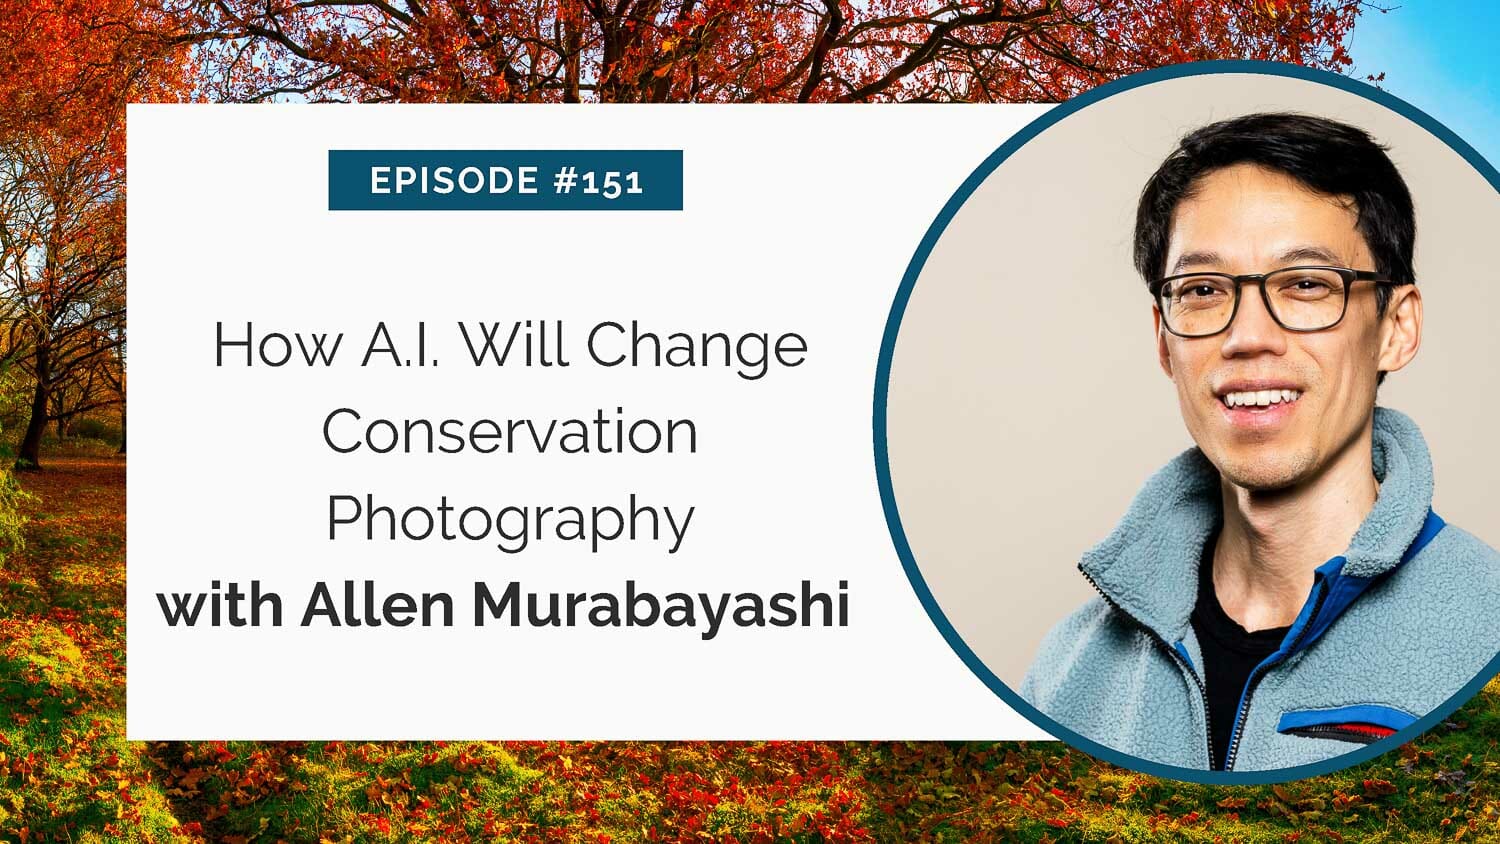 Portrait of a man named allen murabayashi with text discussing a podcast episode about the impact of a.i. on conservation photography.